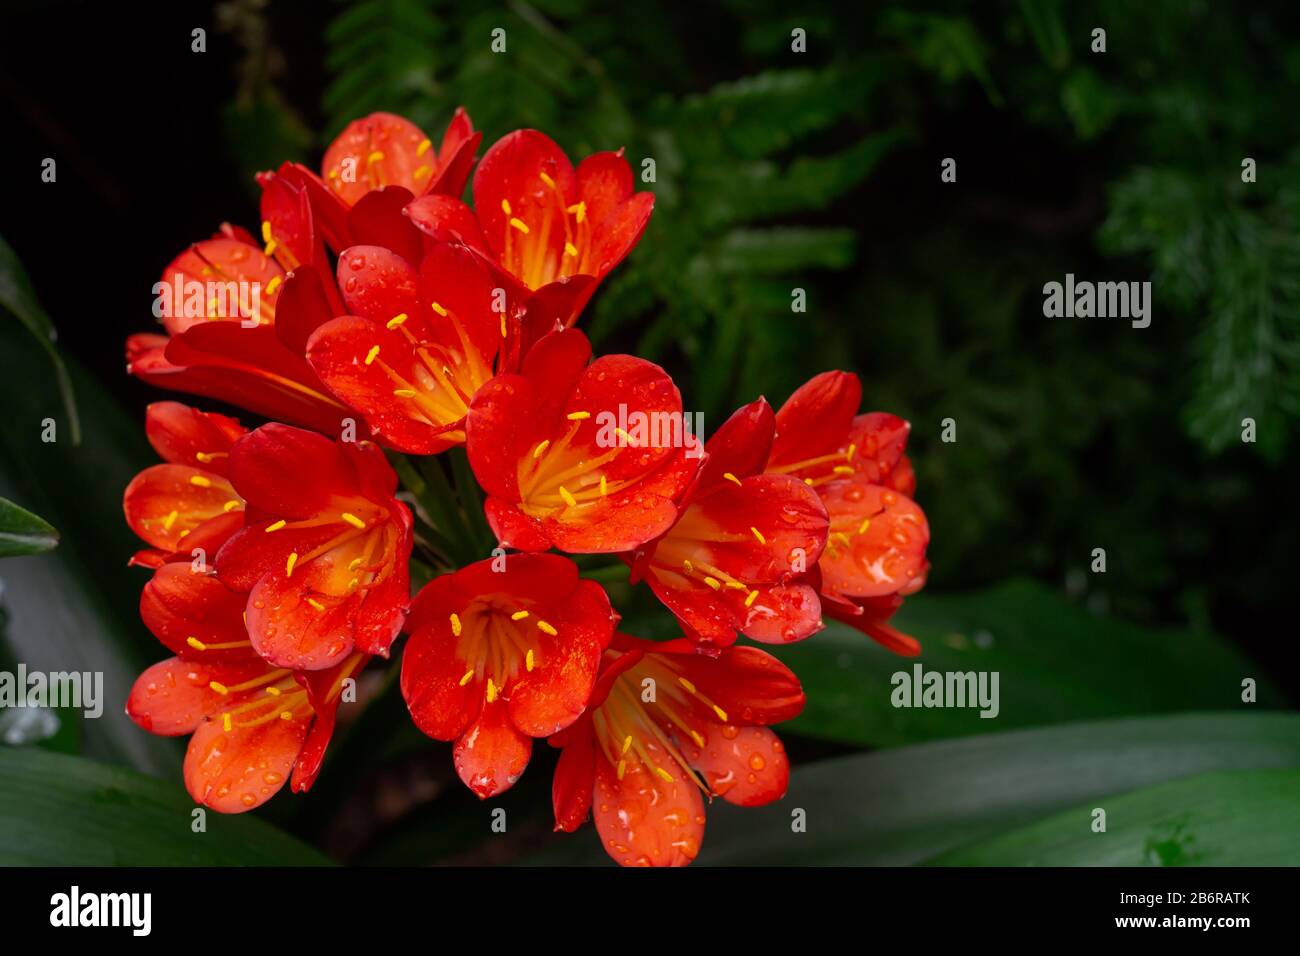 Clivia miniata, also known as Natal lily, bush lily or Kaffir lily, an evergreen perenial native to South Africa with striking red-orange, fiery, trum Stock Photo